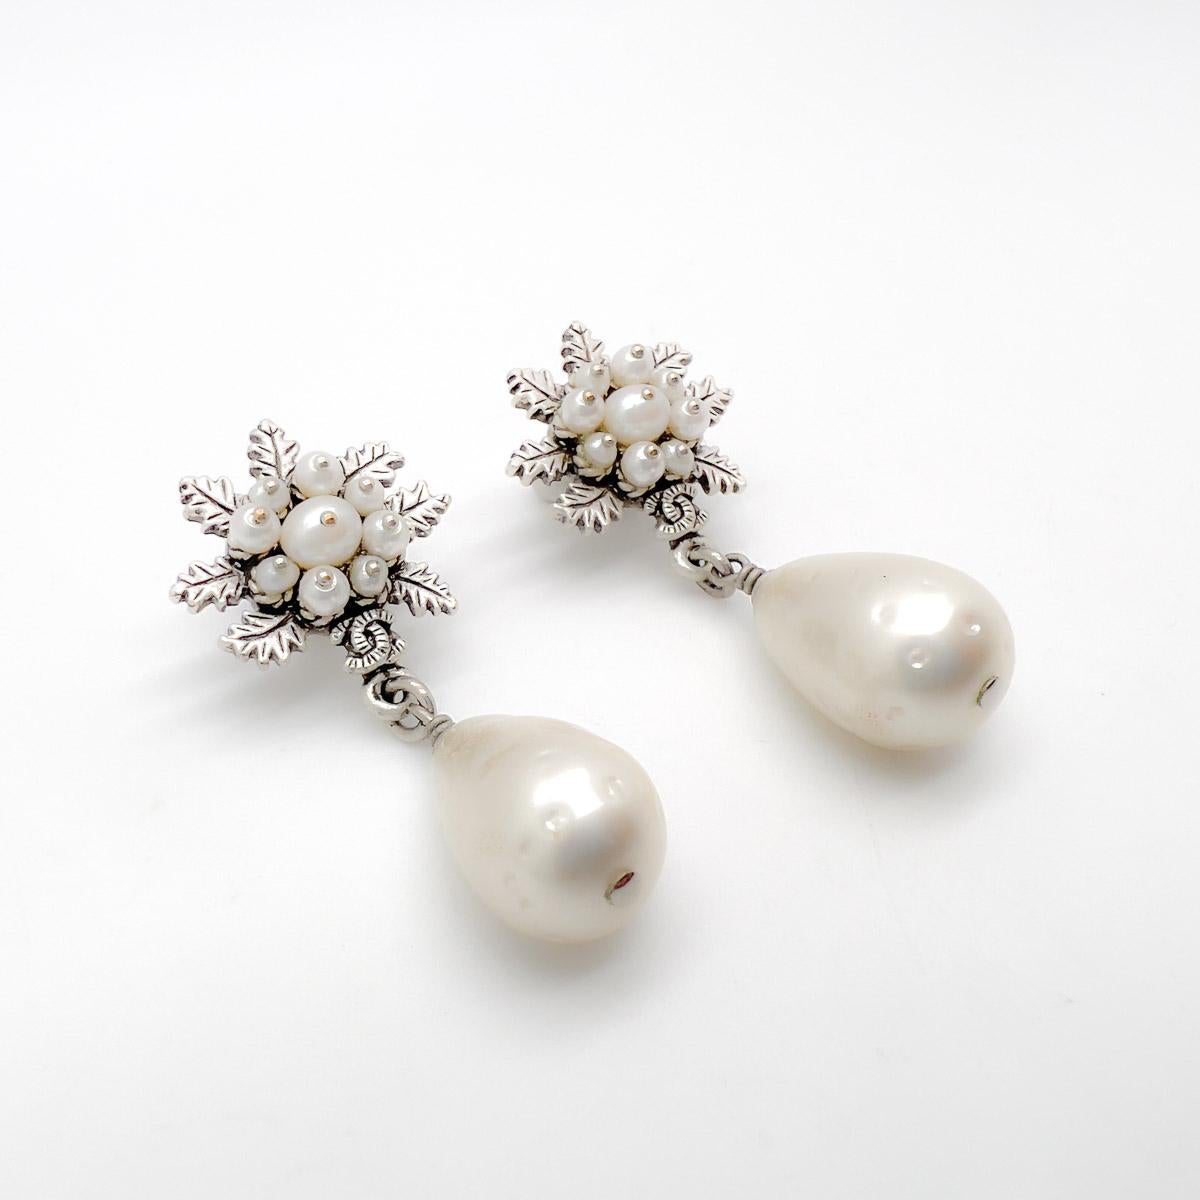 A beautiful pair of pierced Chanel Pearl Earrings from the Autumn Winter 2015 Collection. 
Featuring antique silver tone metal set with Chanel's iconic pearls. Seed pearls adorn the tops, cleverly pinned for extra effect, the top giving way to an